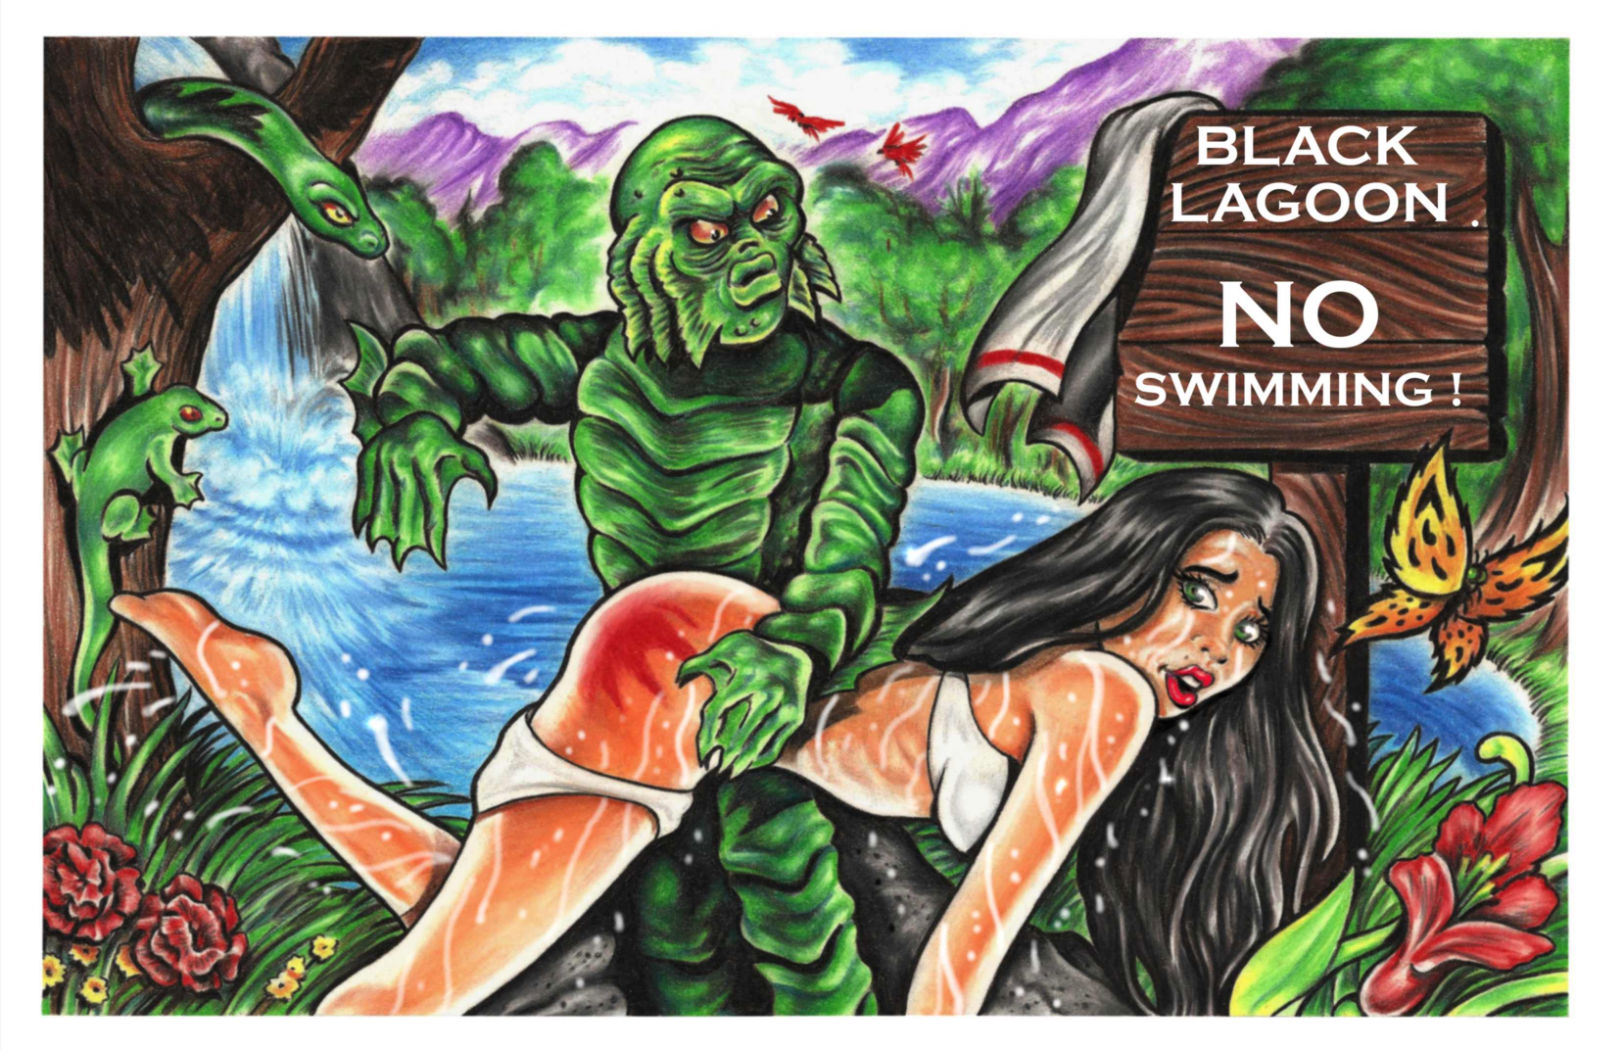 creature from the black lagoon spanks girl for ignoring no swimming sign